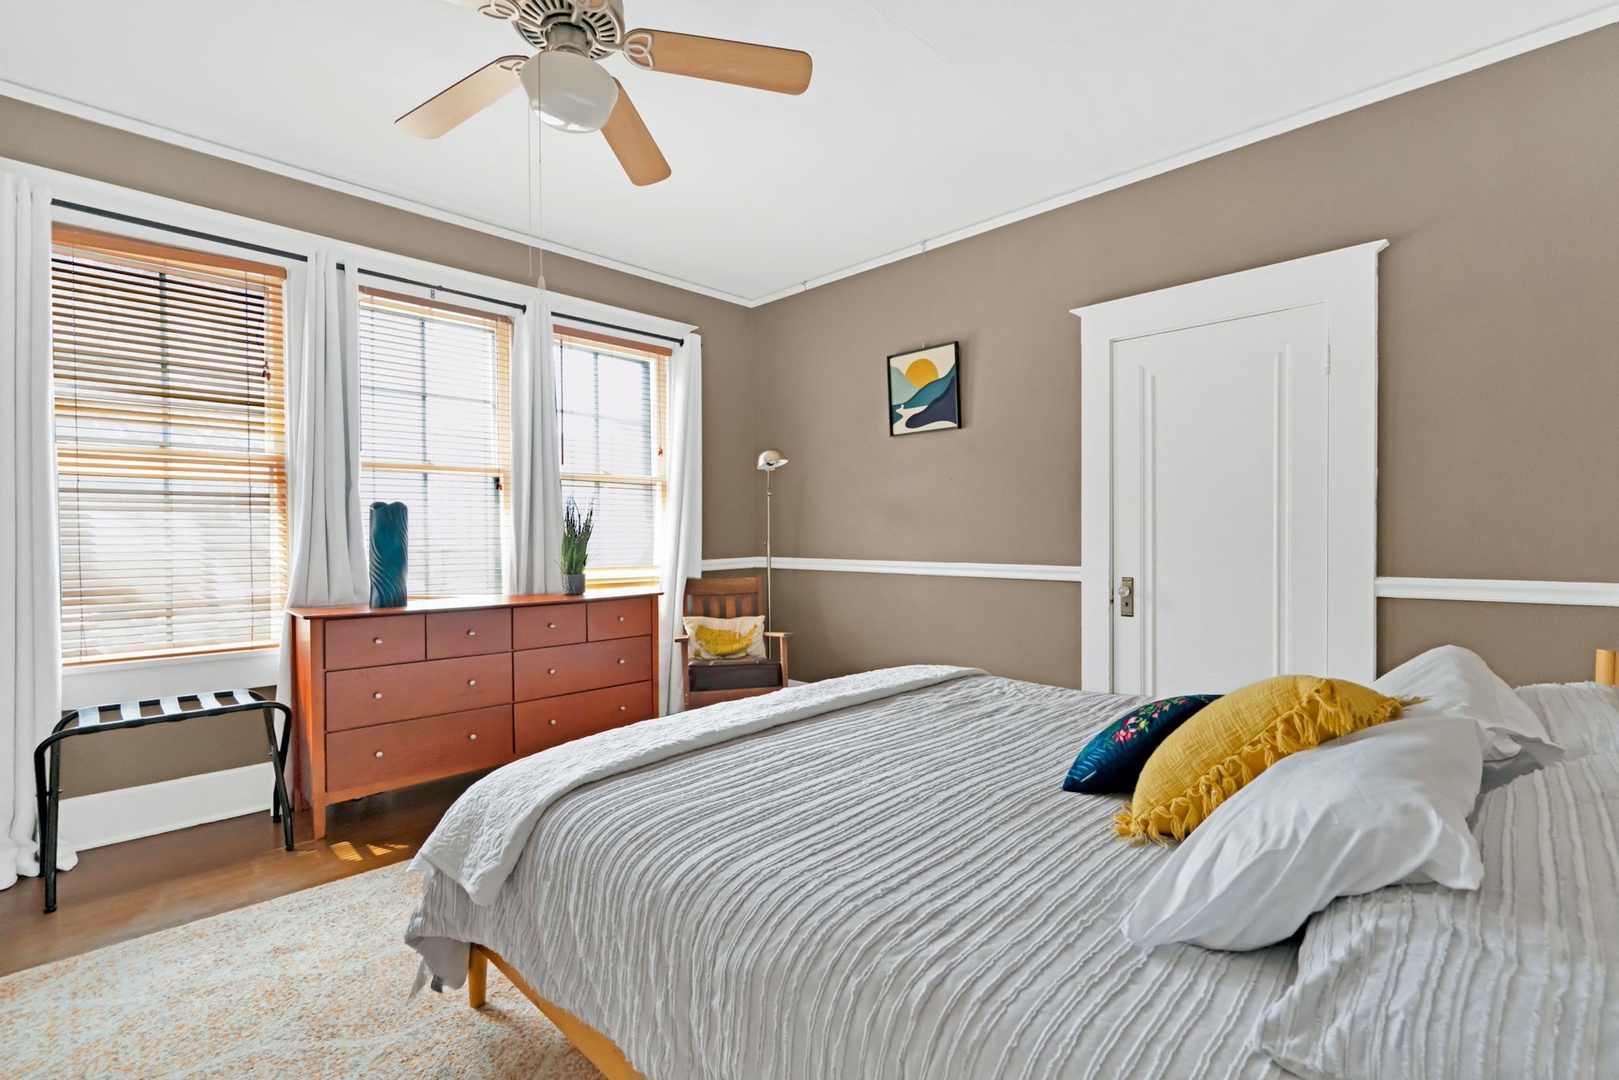 The first of two tranquil bedrooms boasts a plush king-sized bed